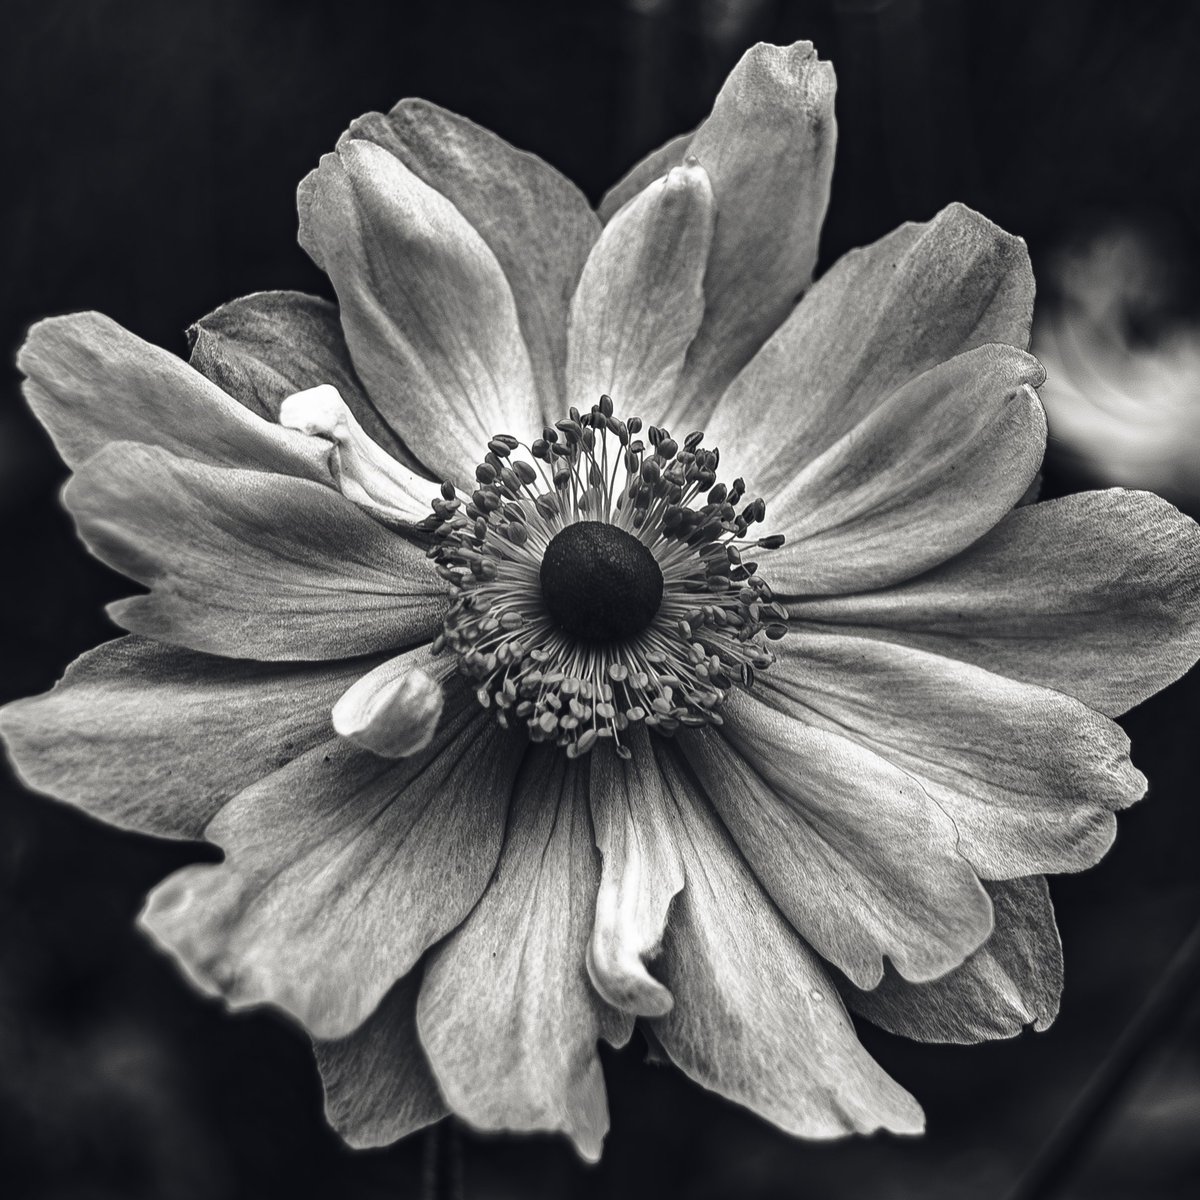 1760 - Black & White Flowers
#photography #nature #naturephotography #macro #macrophotography #flower #blackandwhite